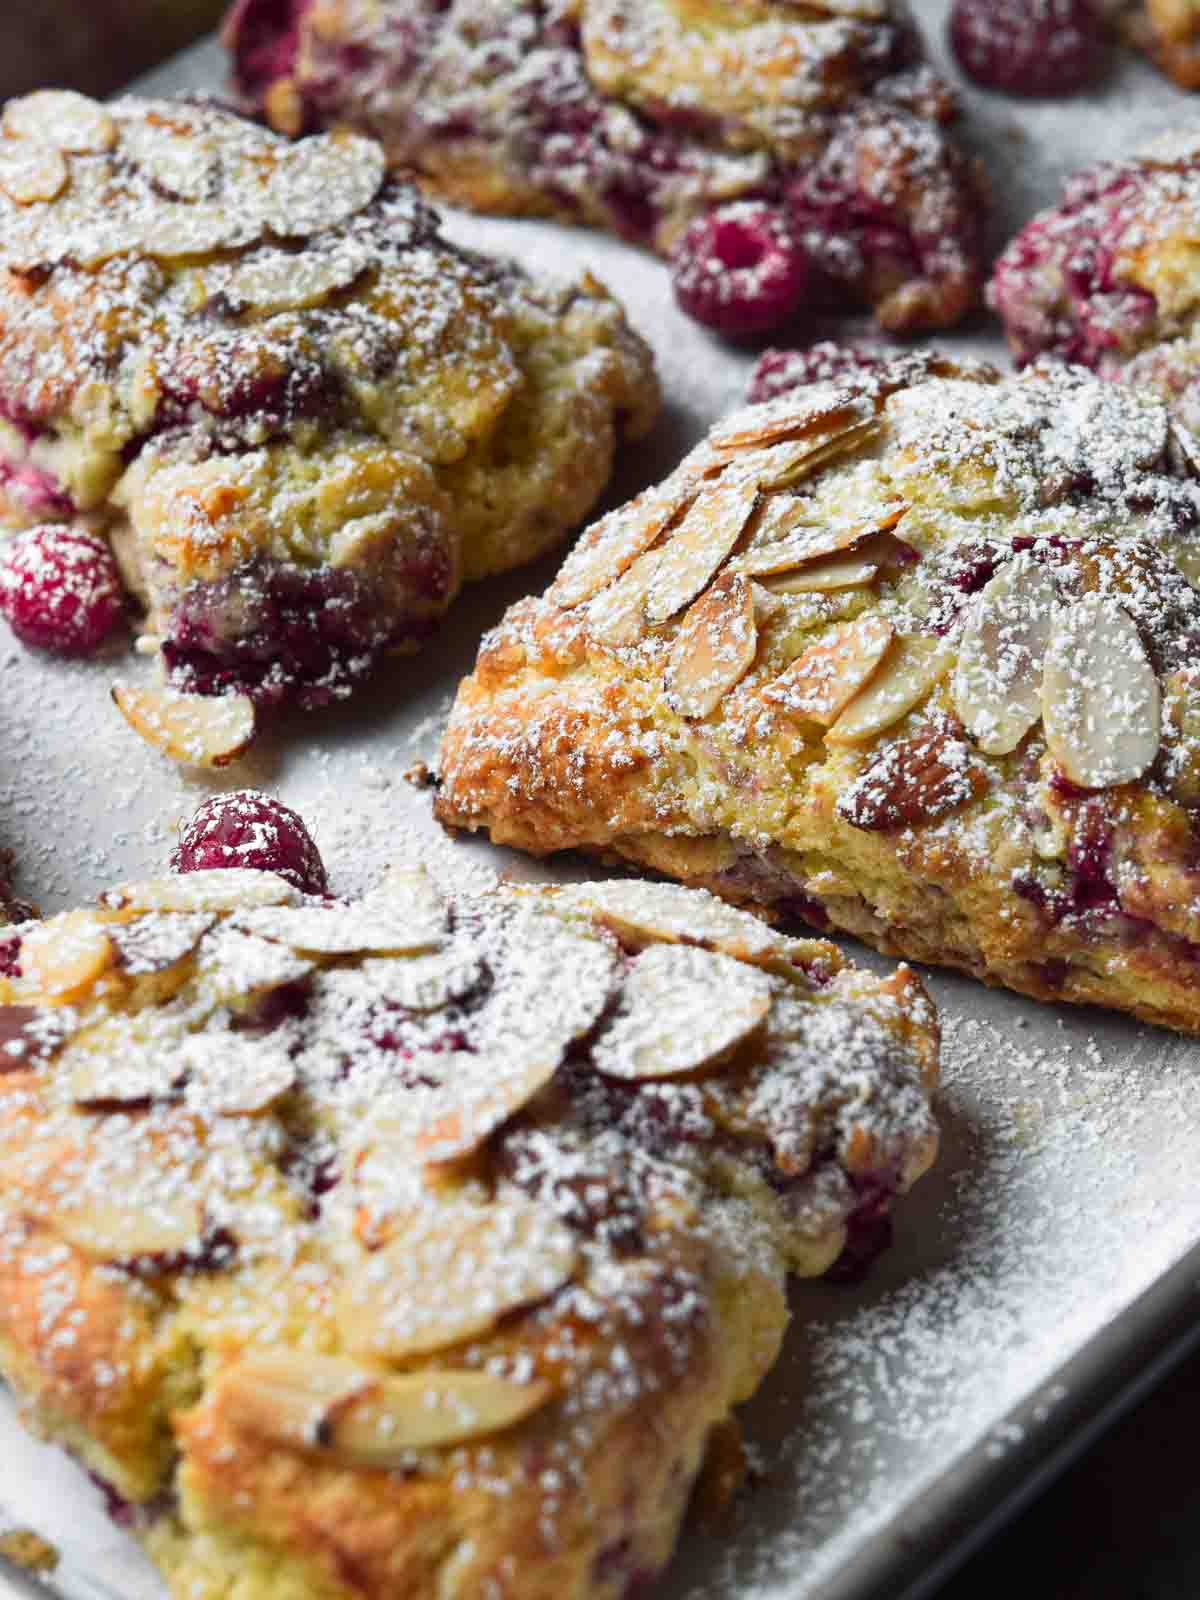 Raspberry almond scones on a baking pan sprinkled with powdered sugar.